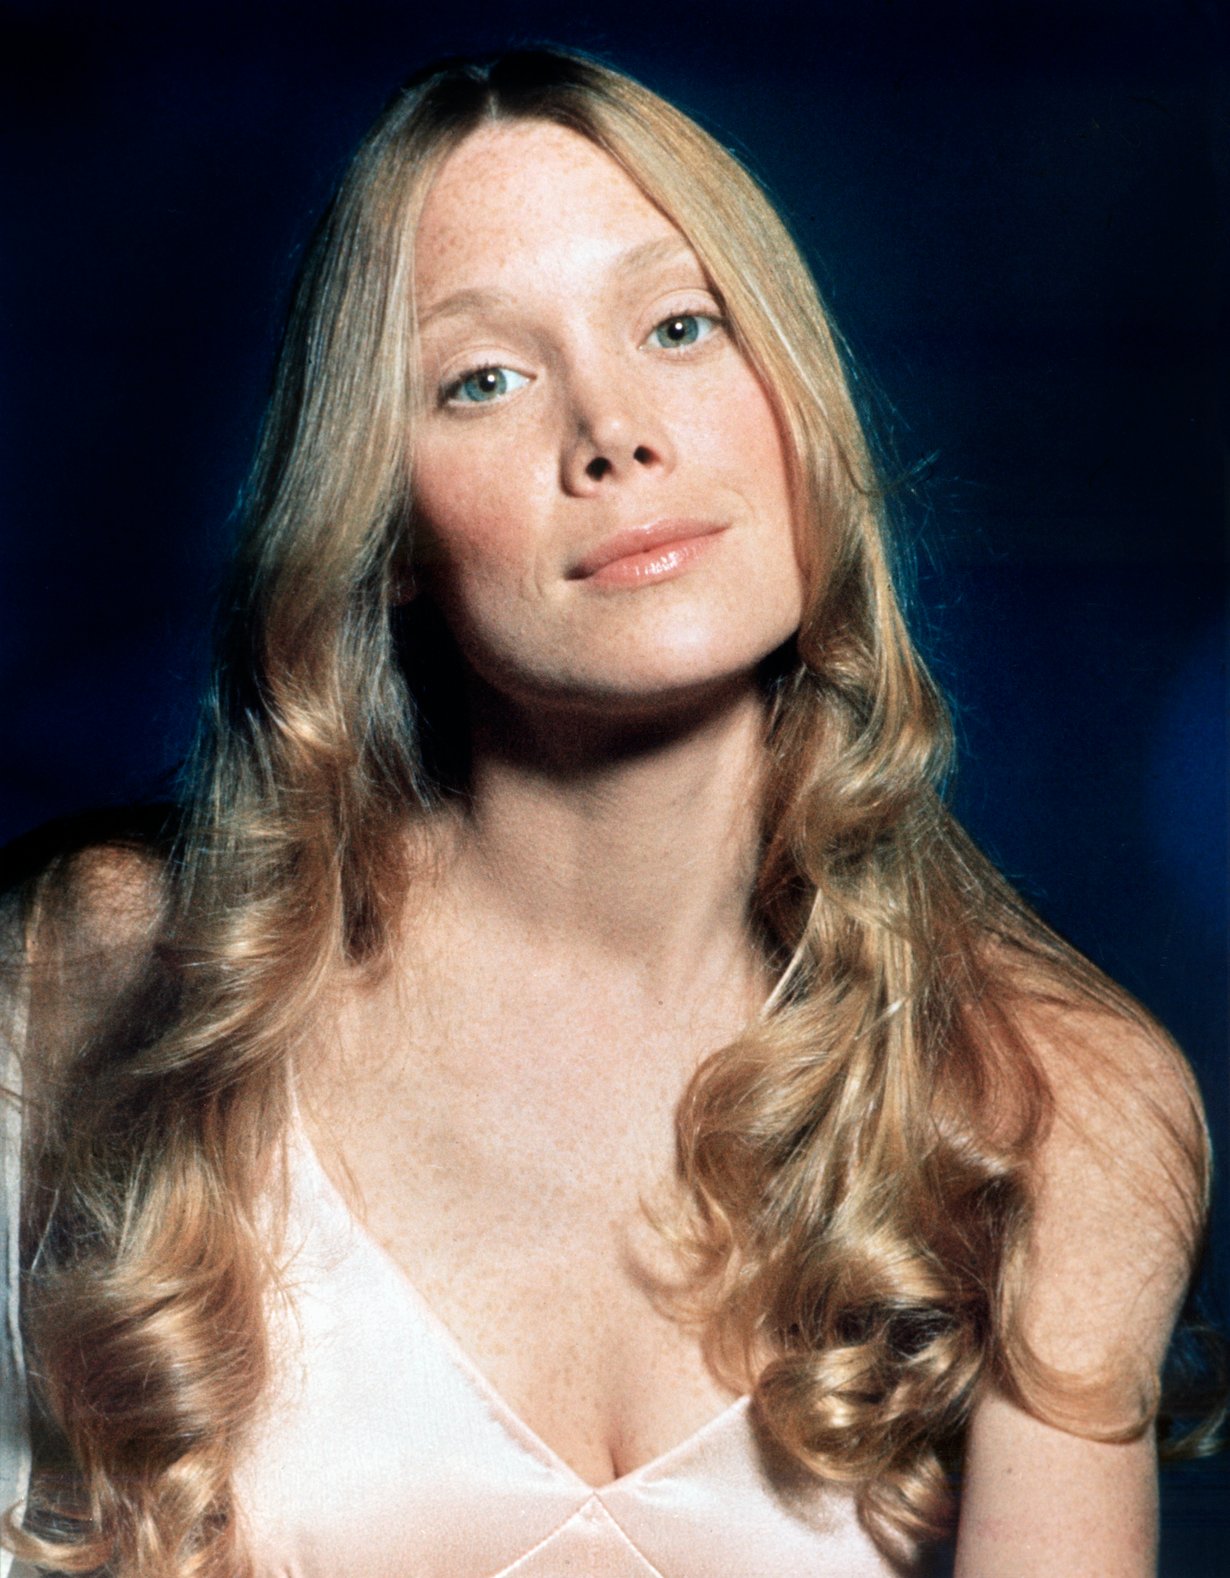 Sissy Spacek in character for the movie Carrie